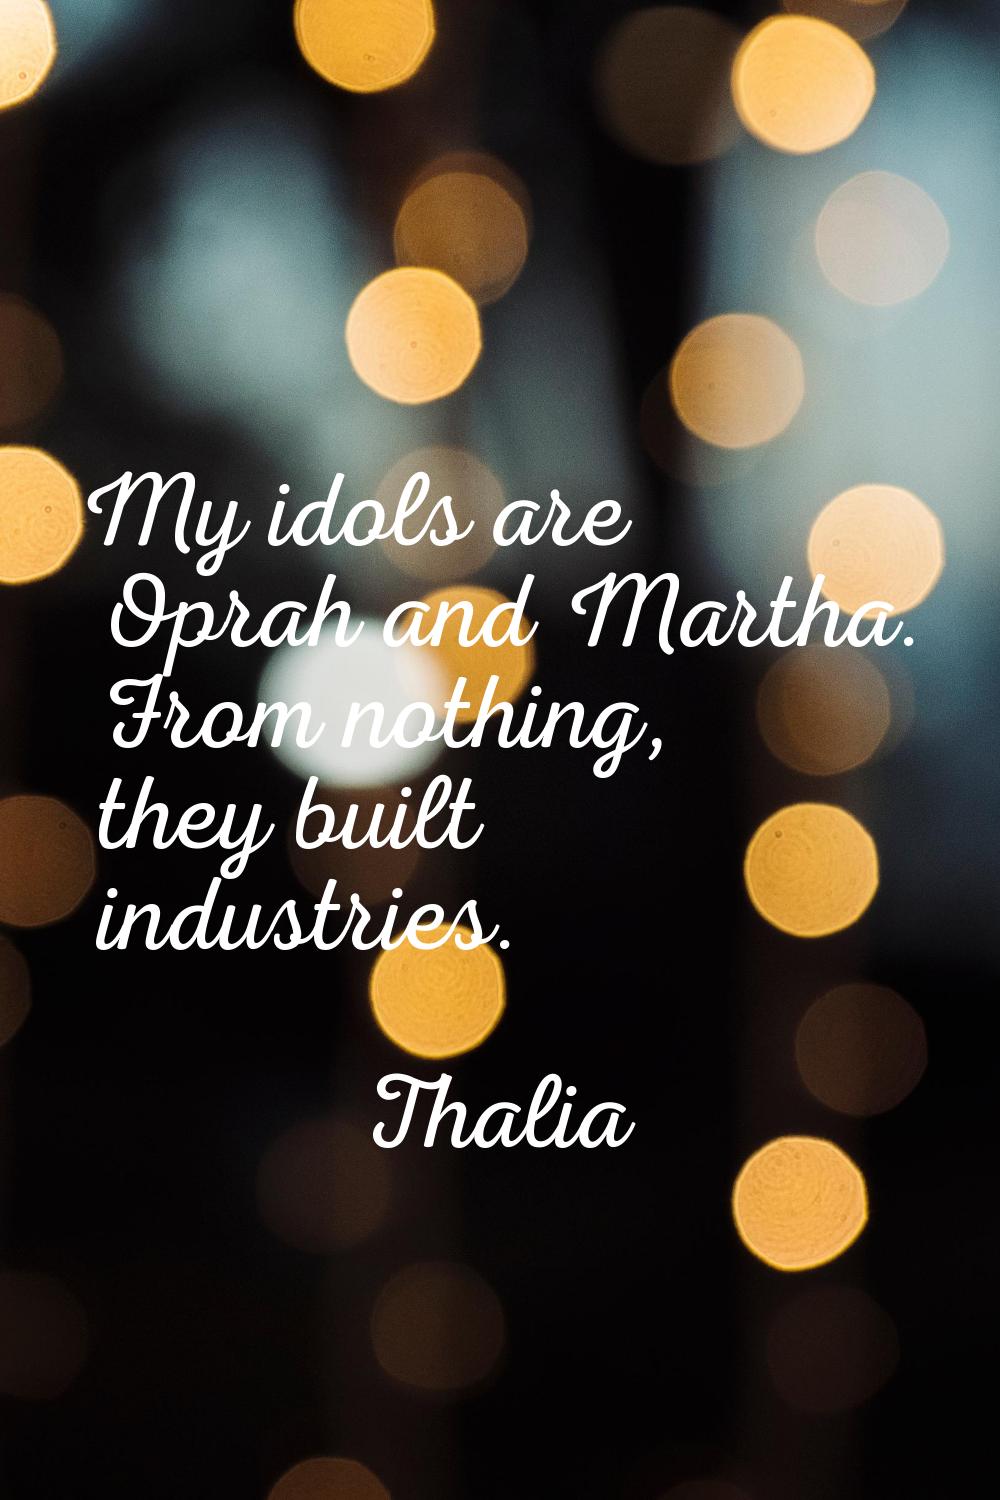 My idols are Oprah and Martha. From nothing, they built industries.